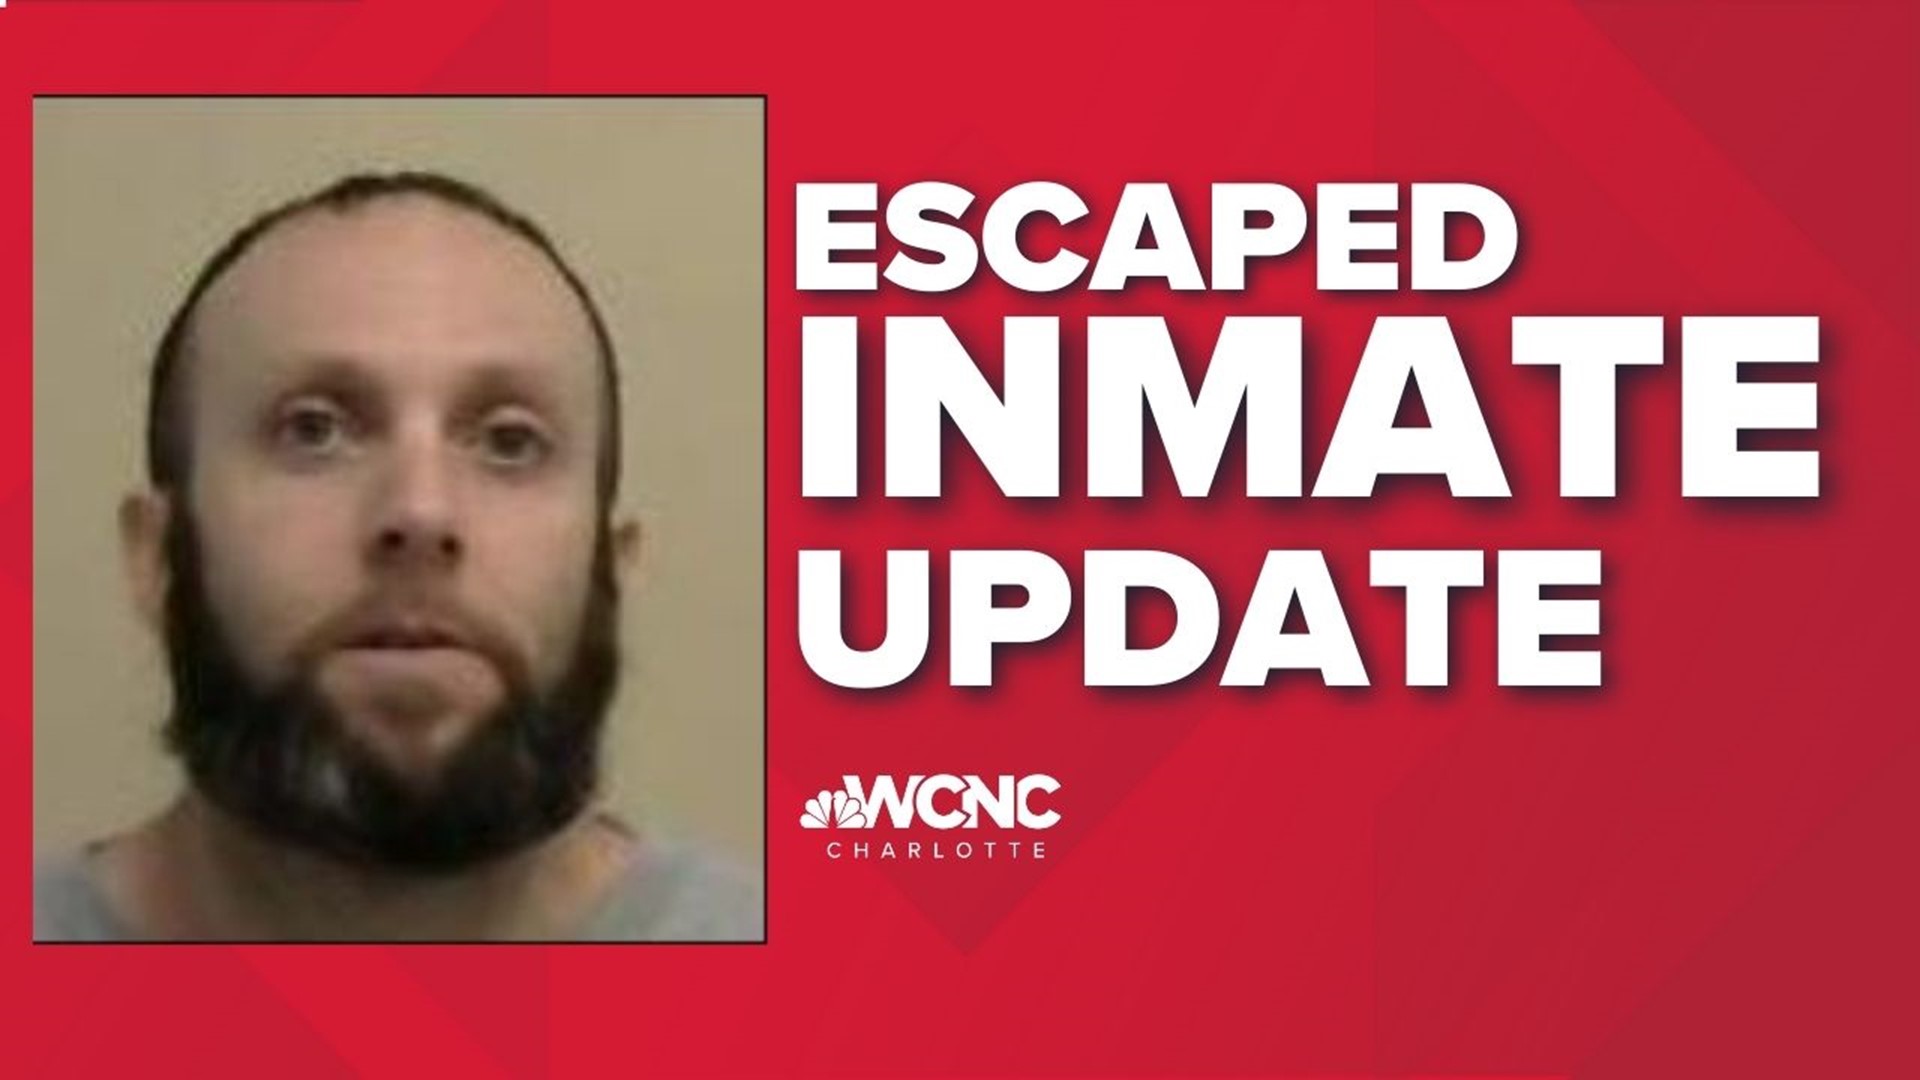 He escaped from a minimum prison security Monday night.